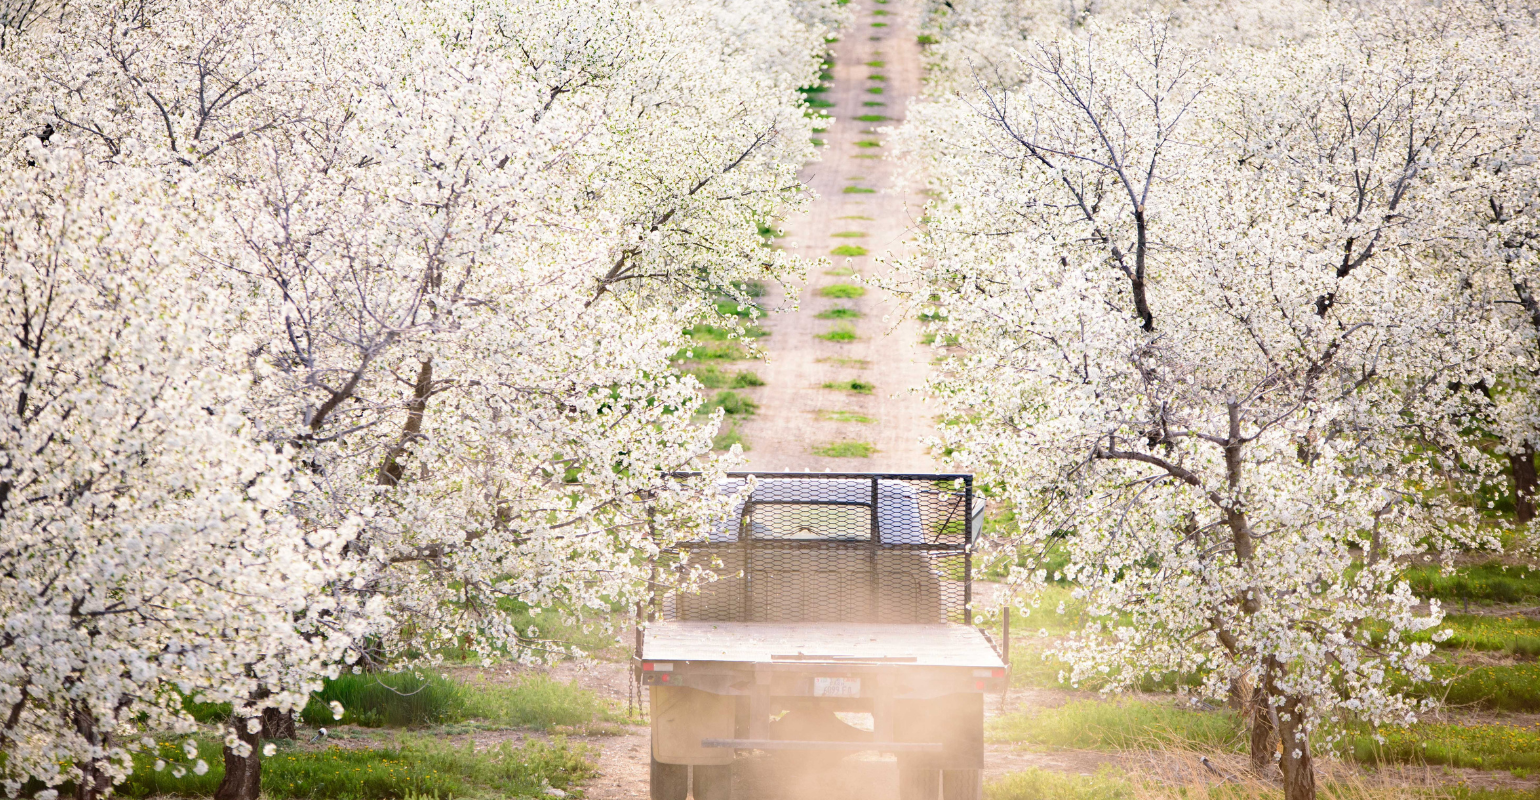 Image of truck driving through cherry field